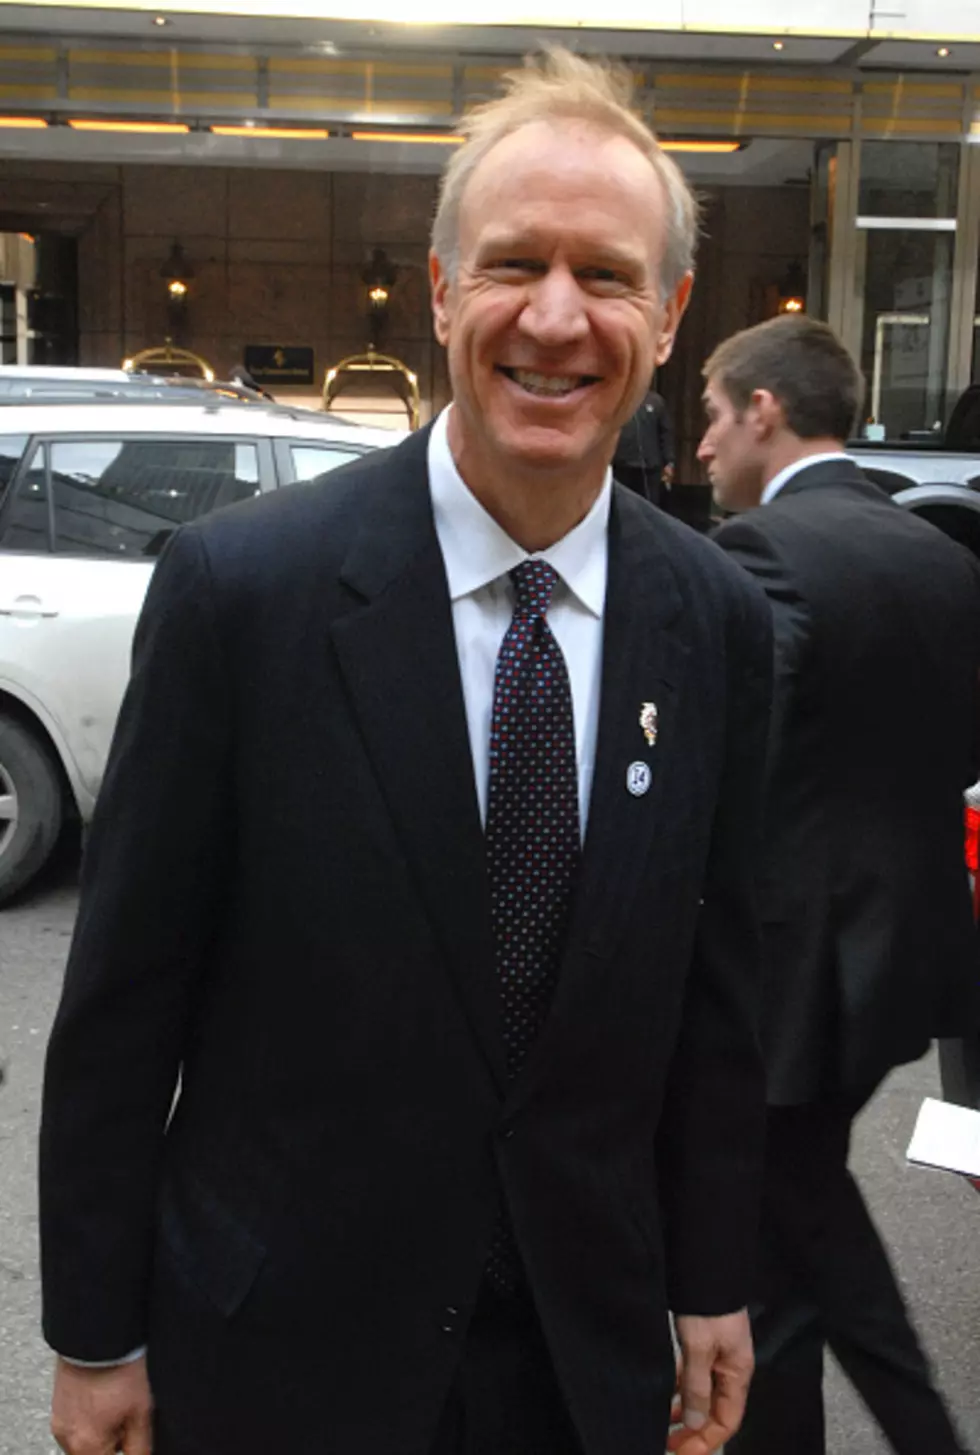 Governor Bruce Rauner on Pritzker, Taxes, Illinois&#8217; Future